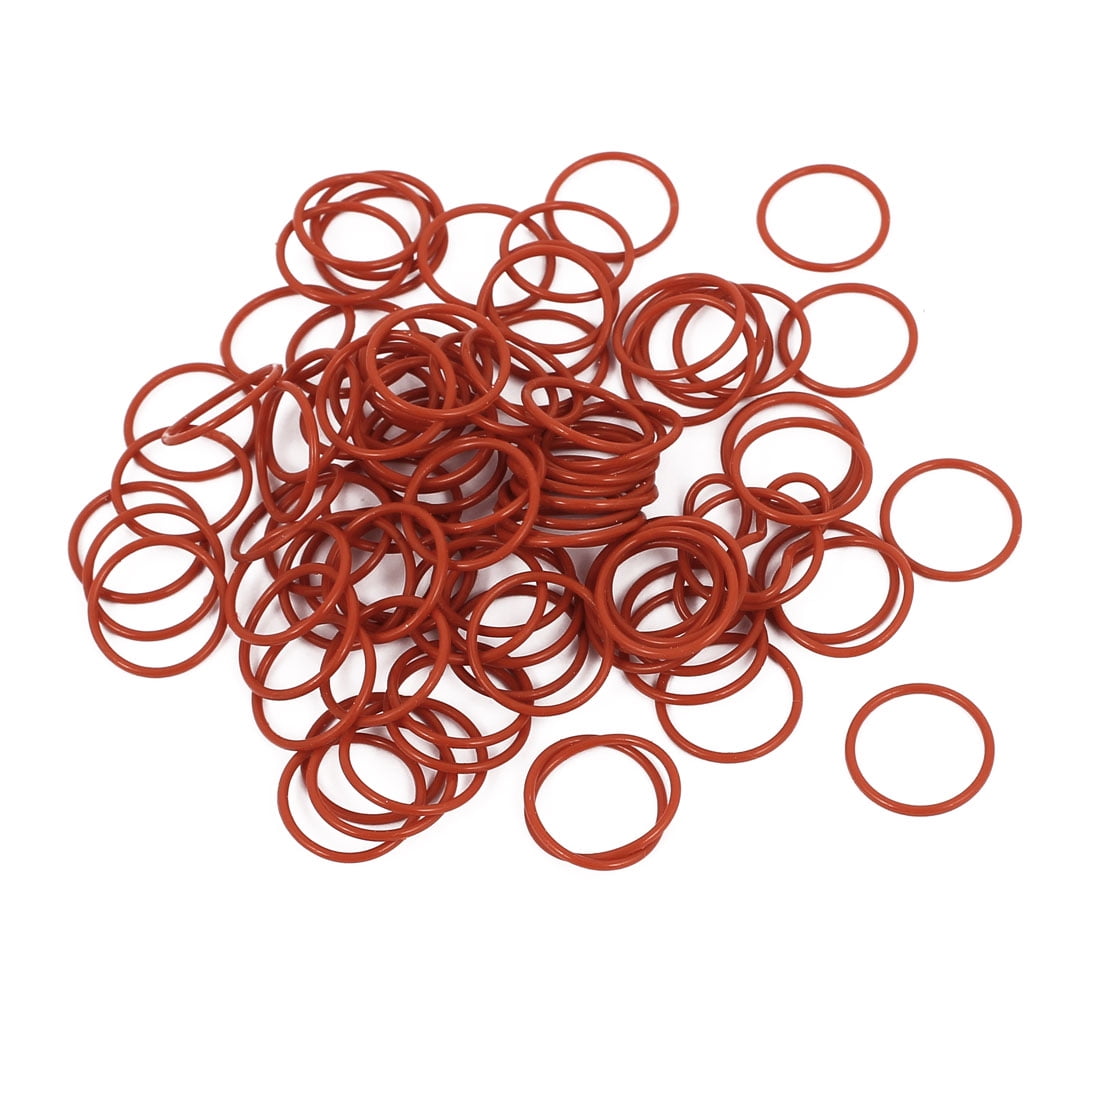 Silicone O-rings 2.5 x 1mm  Price for 25 pcs 